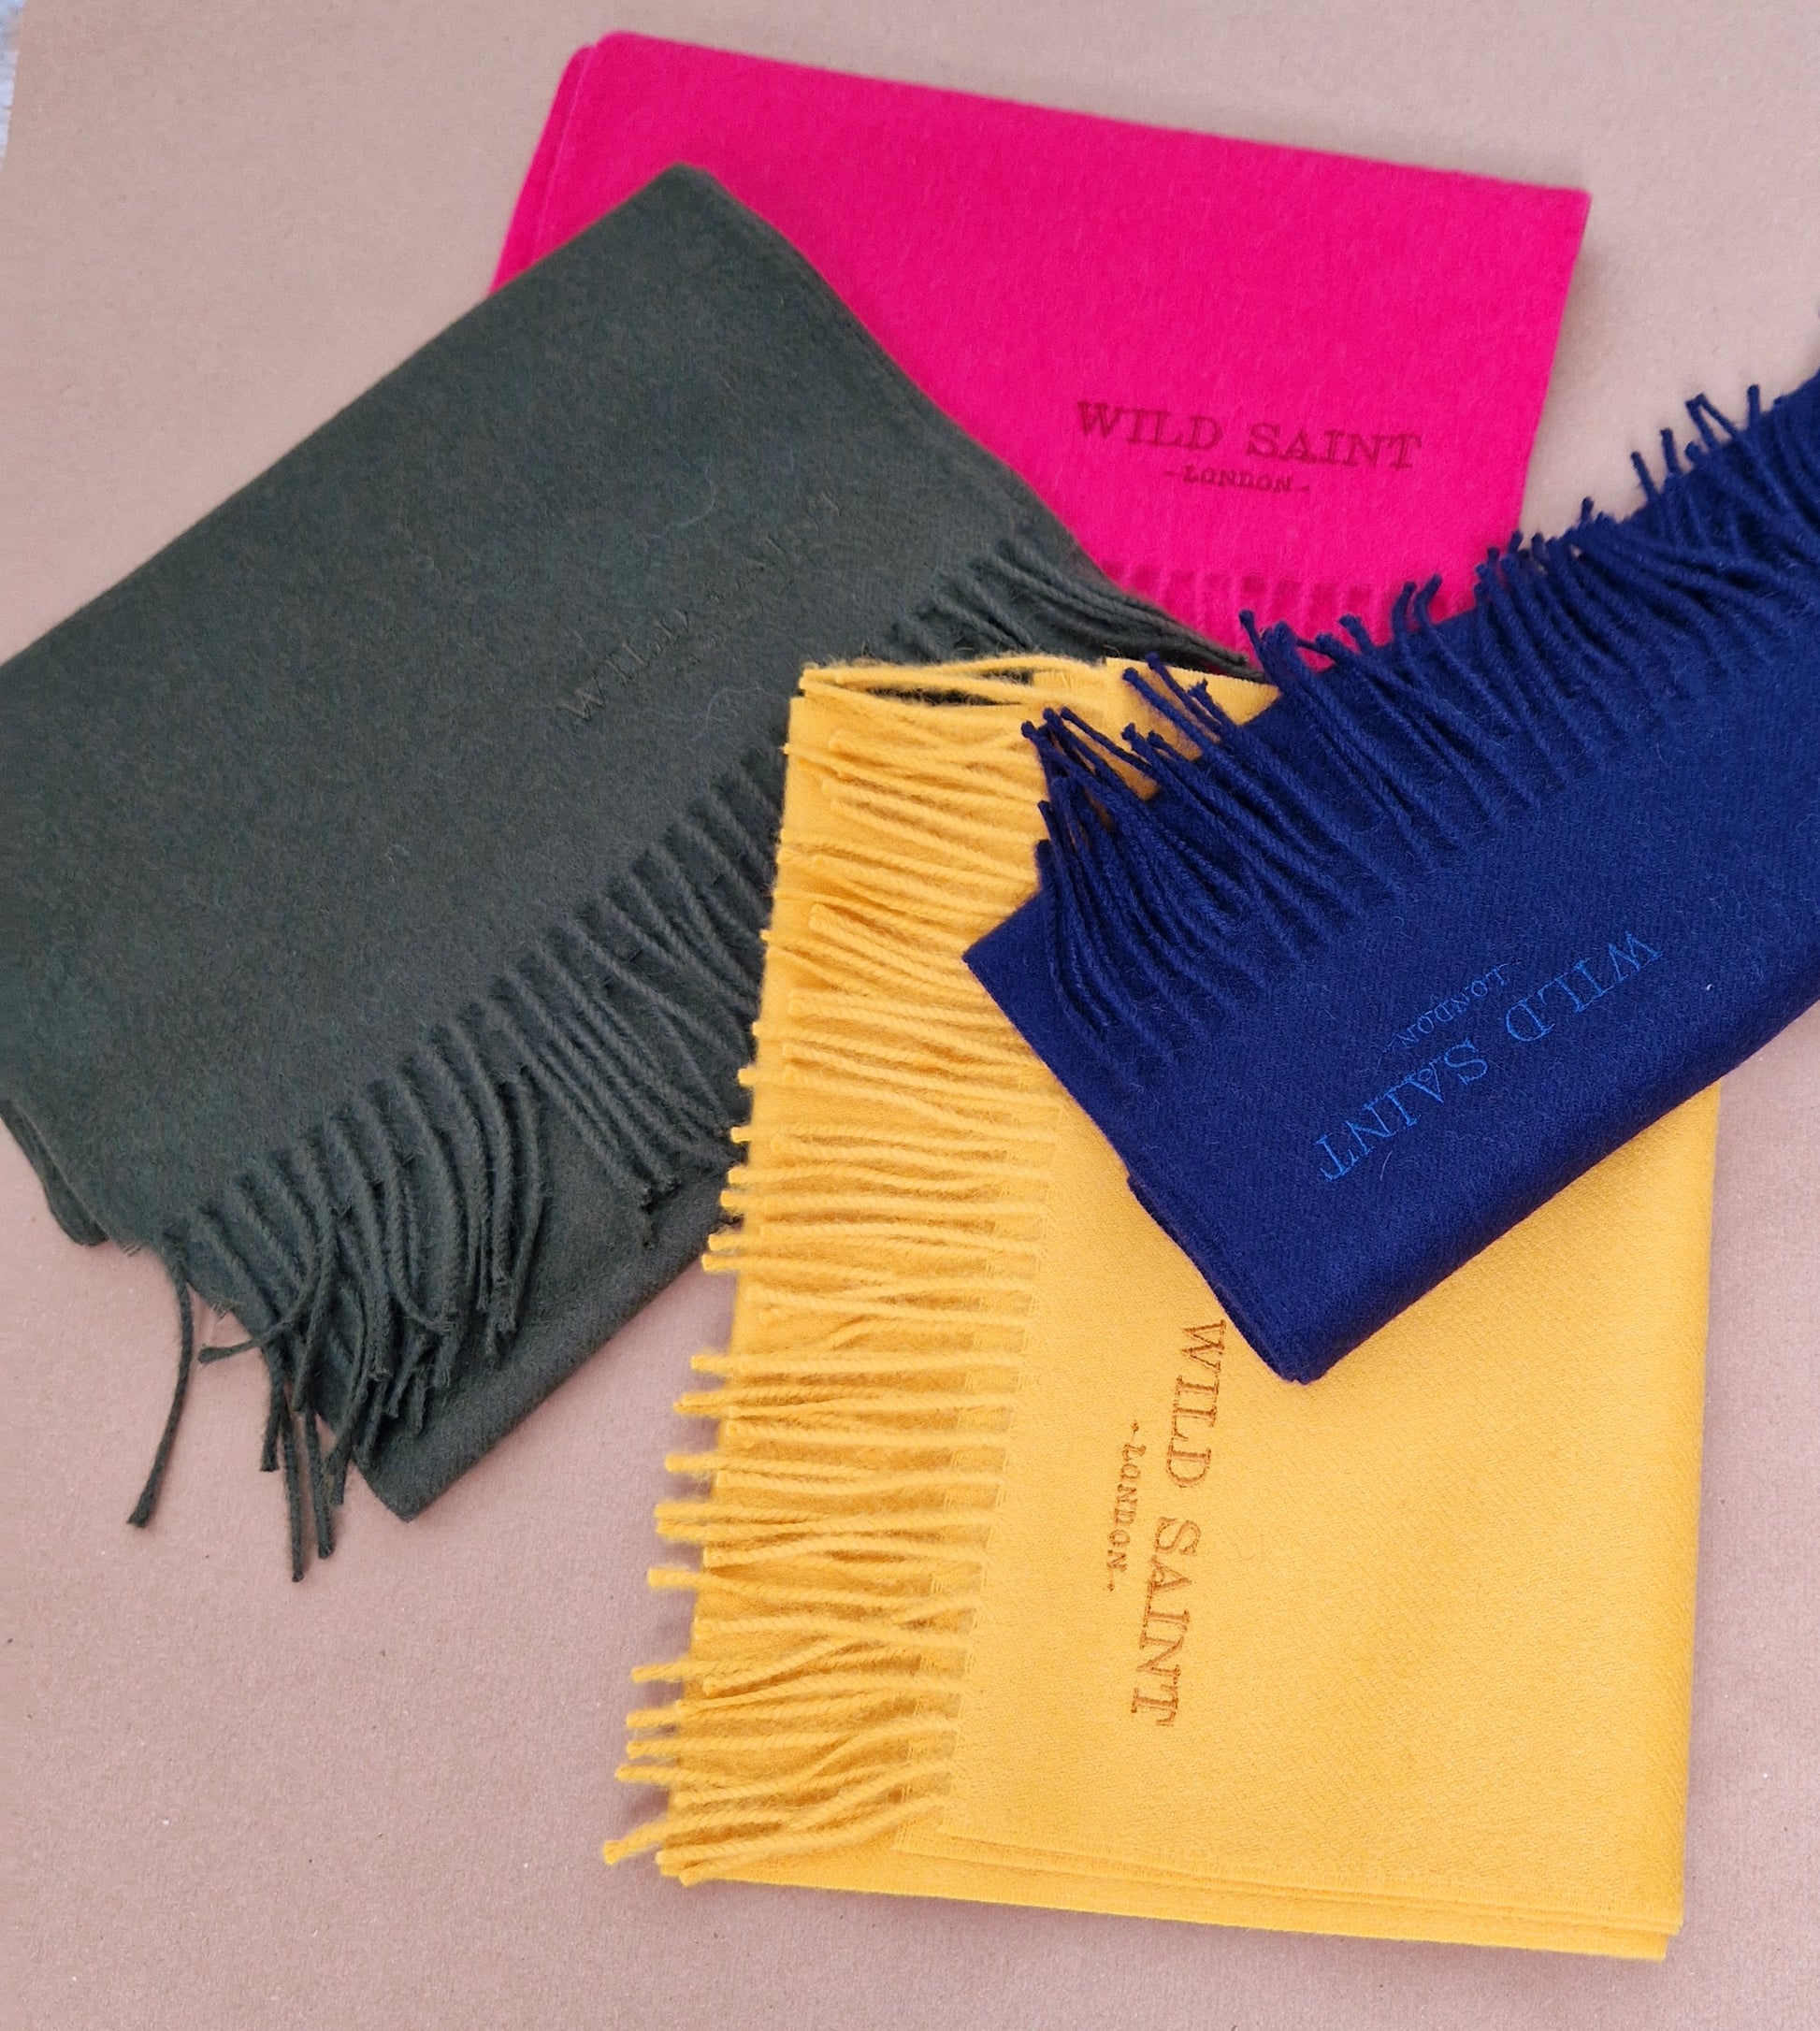 Collecton of colourful scarves Sunflower Yellow, moss green, navy and hot pink. Medium weight 100% baby alpaca scarf for women and men. Gift wrapped as standard and includes complimentary personlisation. Sustainable Luxury designer scarf